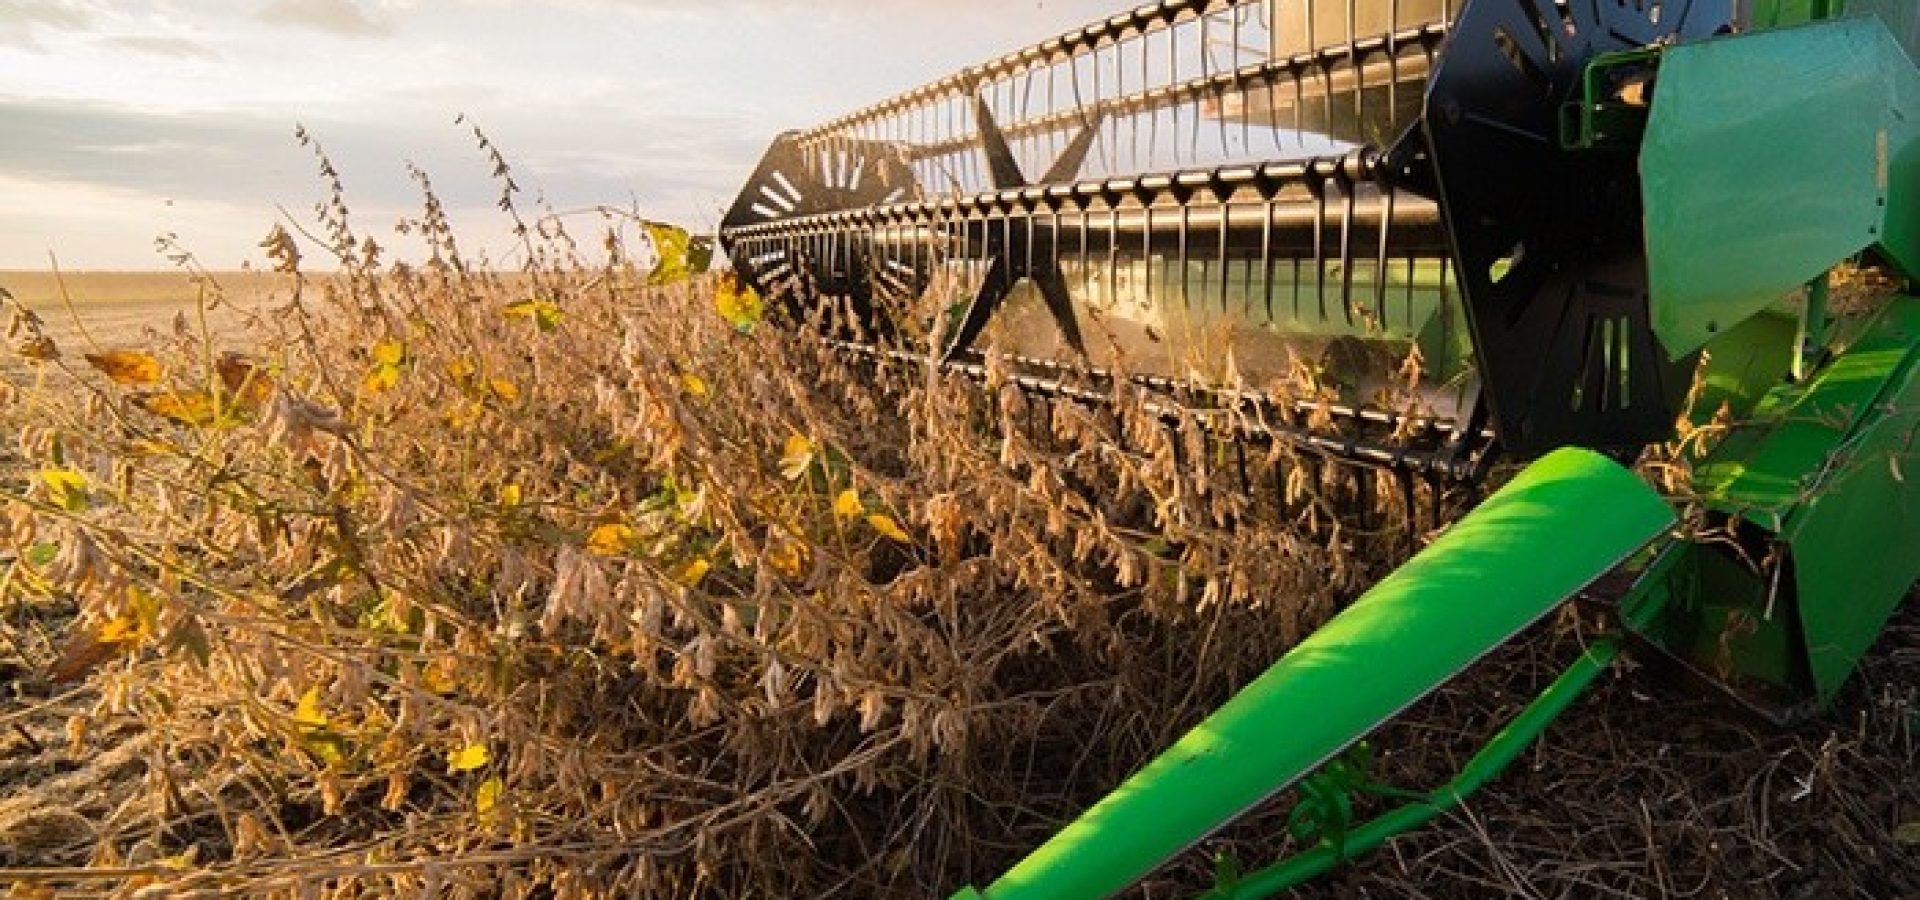 Wibest – China: Soybeans being harvested